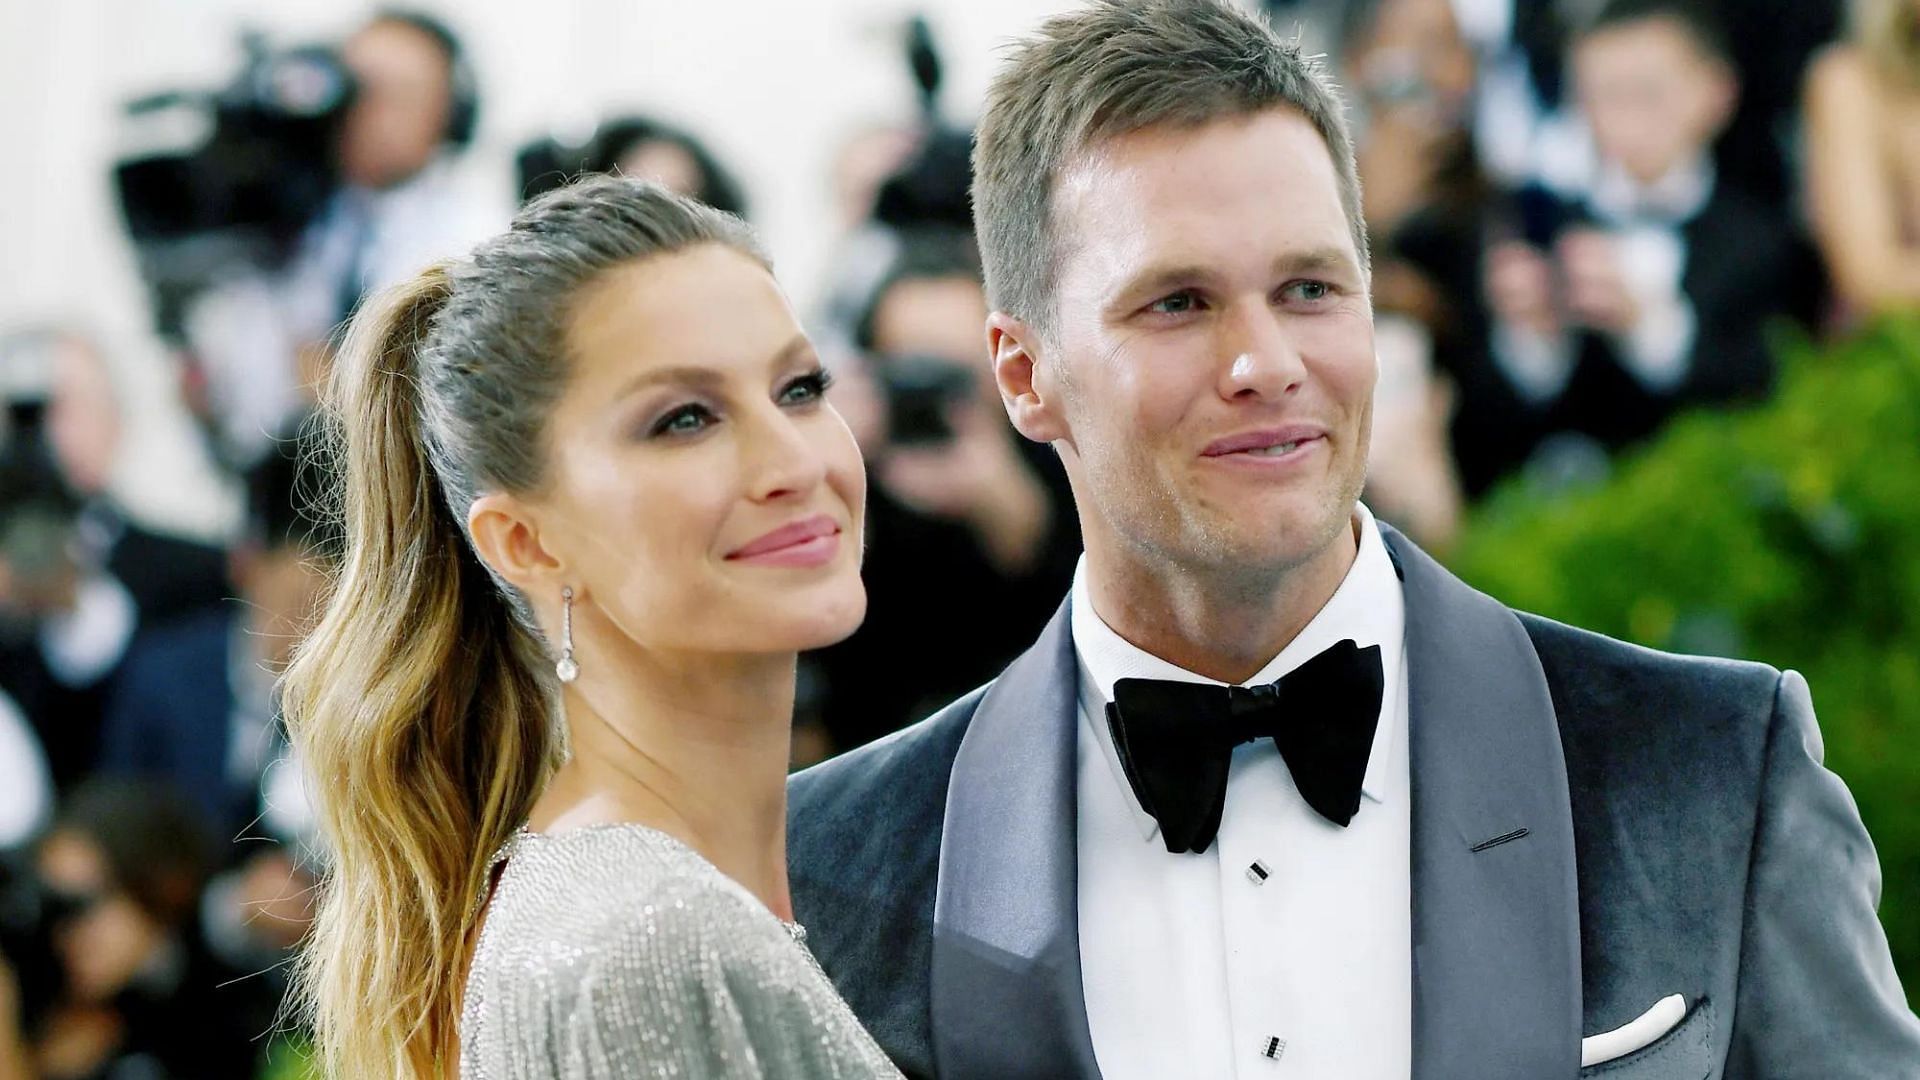 Tom Brady and Gisele Bundchen finalized their divorce on October 2022. (Image credit: Dimitrios Kambouris/Getty Images)